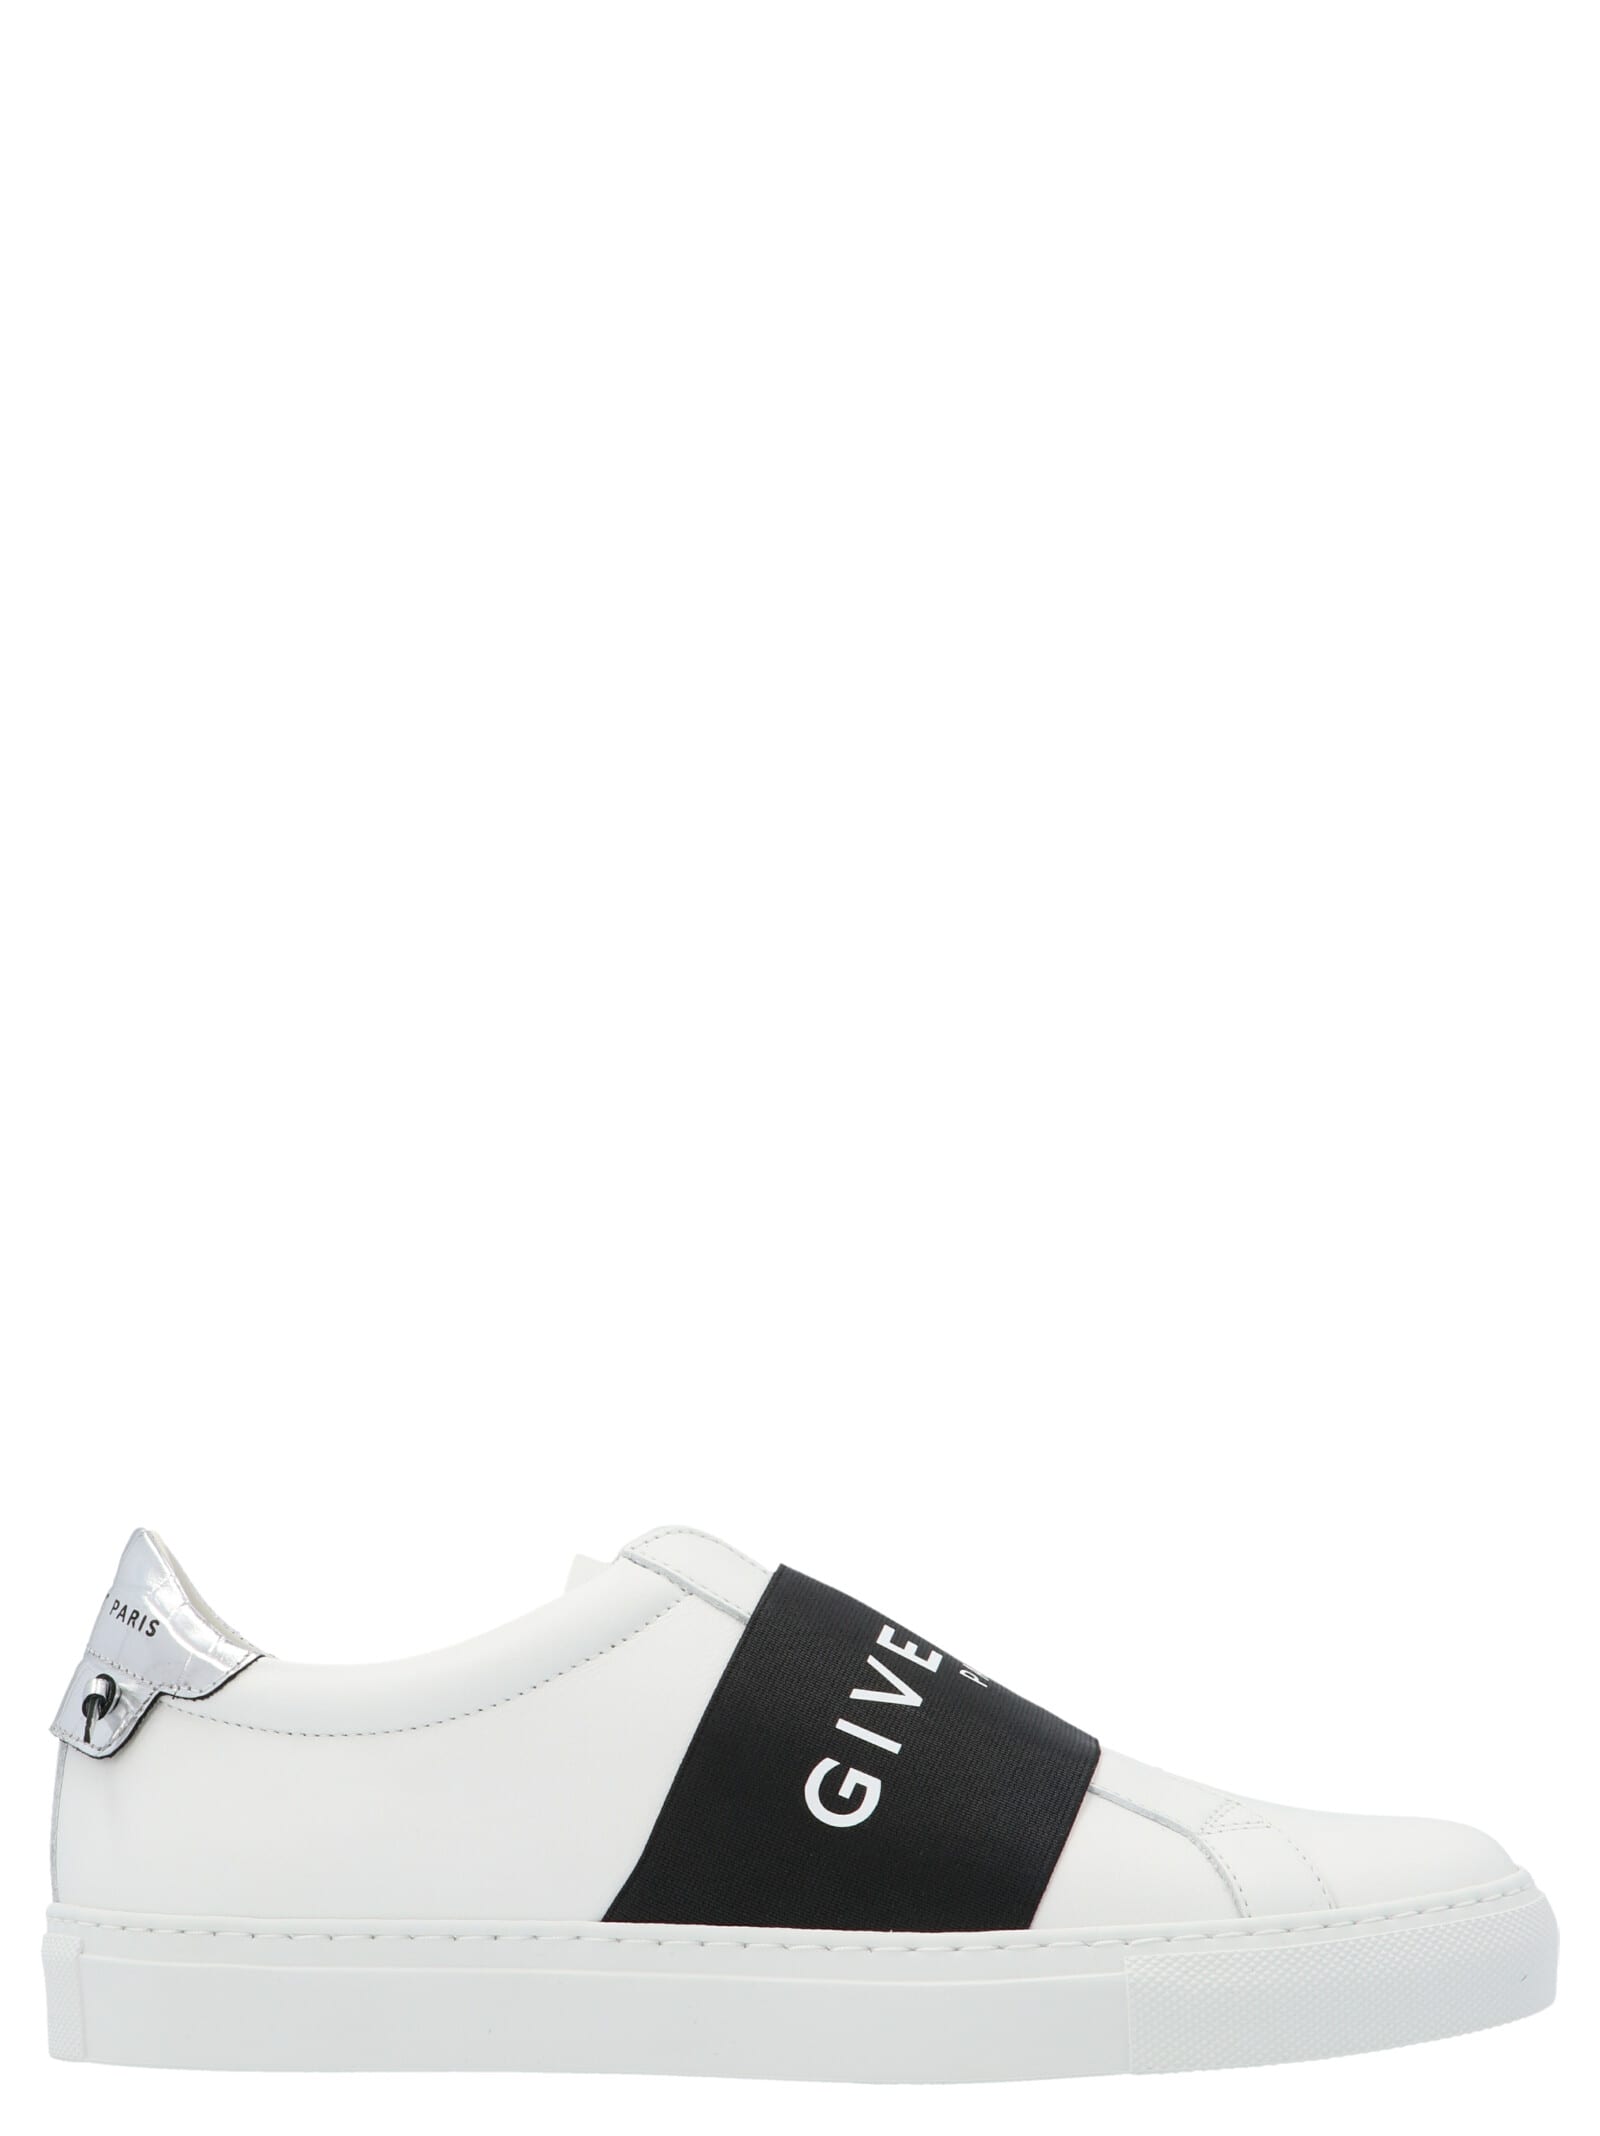 Givenchy urban Street Shoes